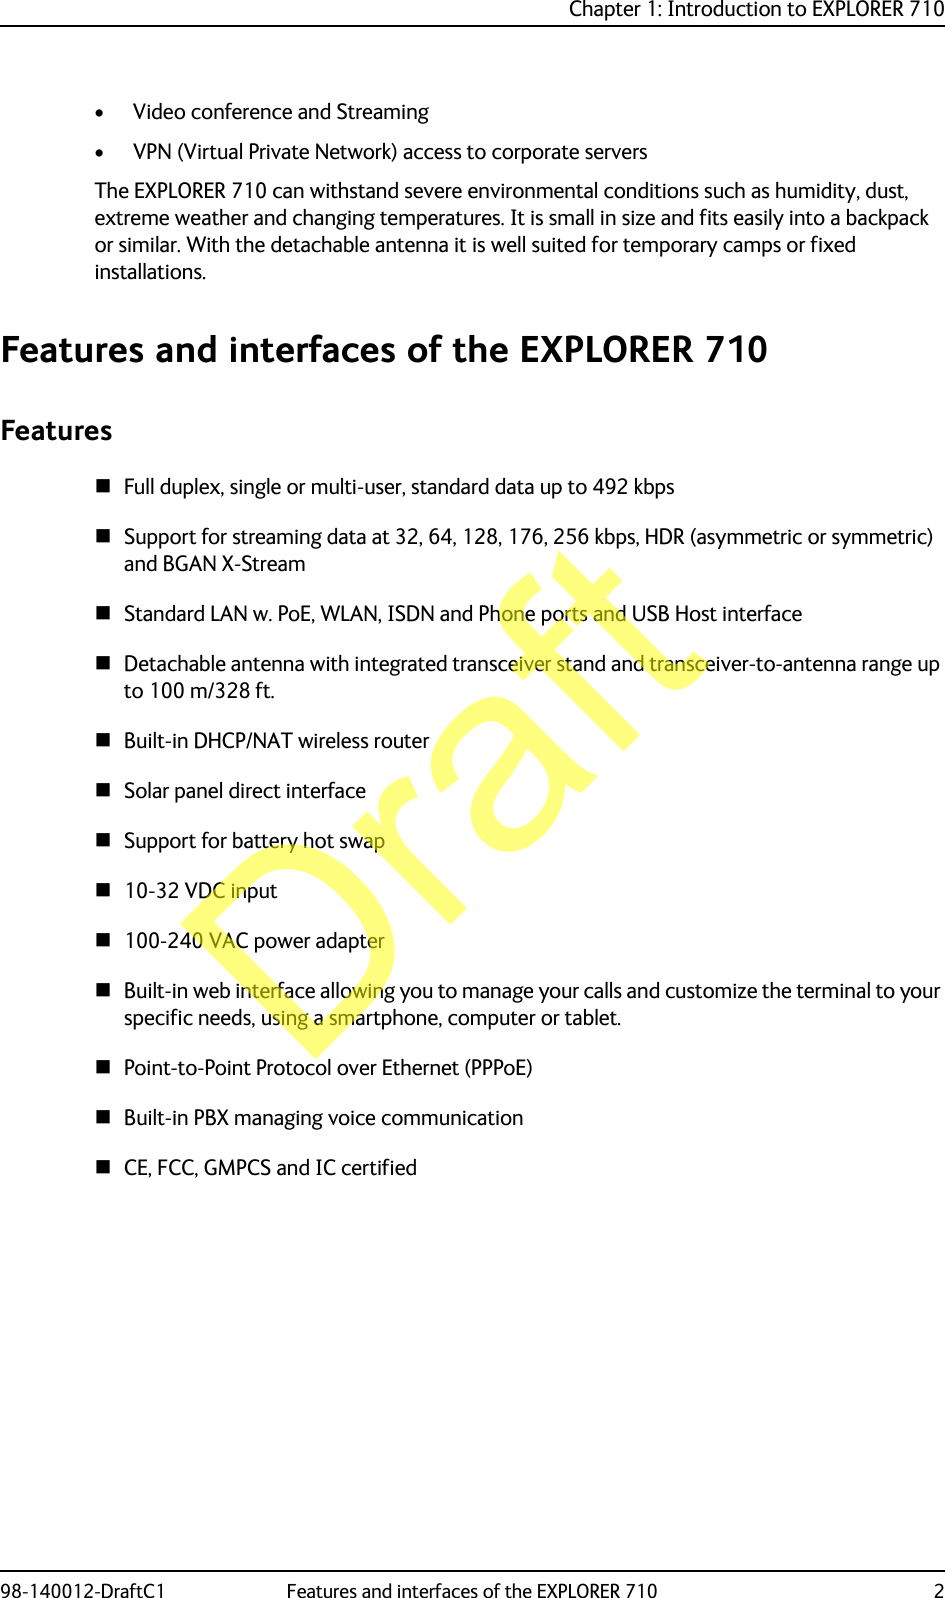 Chapter 1: Introduction to EXPLORER 71098-140012-DraftC1 Features and interfaces of the EXPLORER 710 2• Video conference and Streaming• VPN (Virtual Private Network) access to corporate serversThe EXPLORER 710 can withstand severe environmental conditions such as humidity, dust, extreme weather and changing temperatures. It is small in size and fits easily into a backpack or similar. With the detachable antenna it is well suited for temporary camps or fixed installations. Features and interfaces of the EXPLORER 710FeaturesFull duplex, single or multi-user, standard data up to 492 kbpsSupport for streaming data at 32, 64, 128, 176, 256 kbps, HDR (asymmetric or symmetric) and BGAN X-StreamStandard LAN w. PoE, WLAN, ISDN and Phone ports and USB Host interfaceDetachable antenna with integrated transceiver stand and transceiver-to-antenna range up to 100 m/328 ft.Built-in DHCP/NAT wireless routerSolar panel direct interfaceSupport for battery hot swap10-32 VDC input100-240 VAC power adapterBuilt-in web interface allowing you to manage your calls and customize the terminal to your specific needs, using a smartphone, computer or tablet.Point-to-Point Protocol over Ethernet (PPPoE)Built-in PBX managing voice communicationCE, FCC, GMPCS and IC certifiedDraft